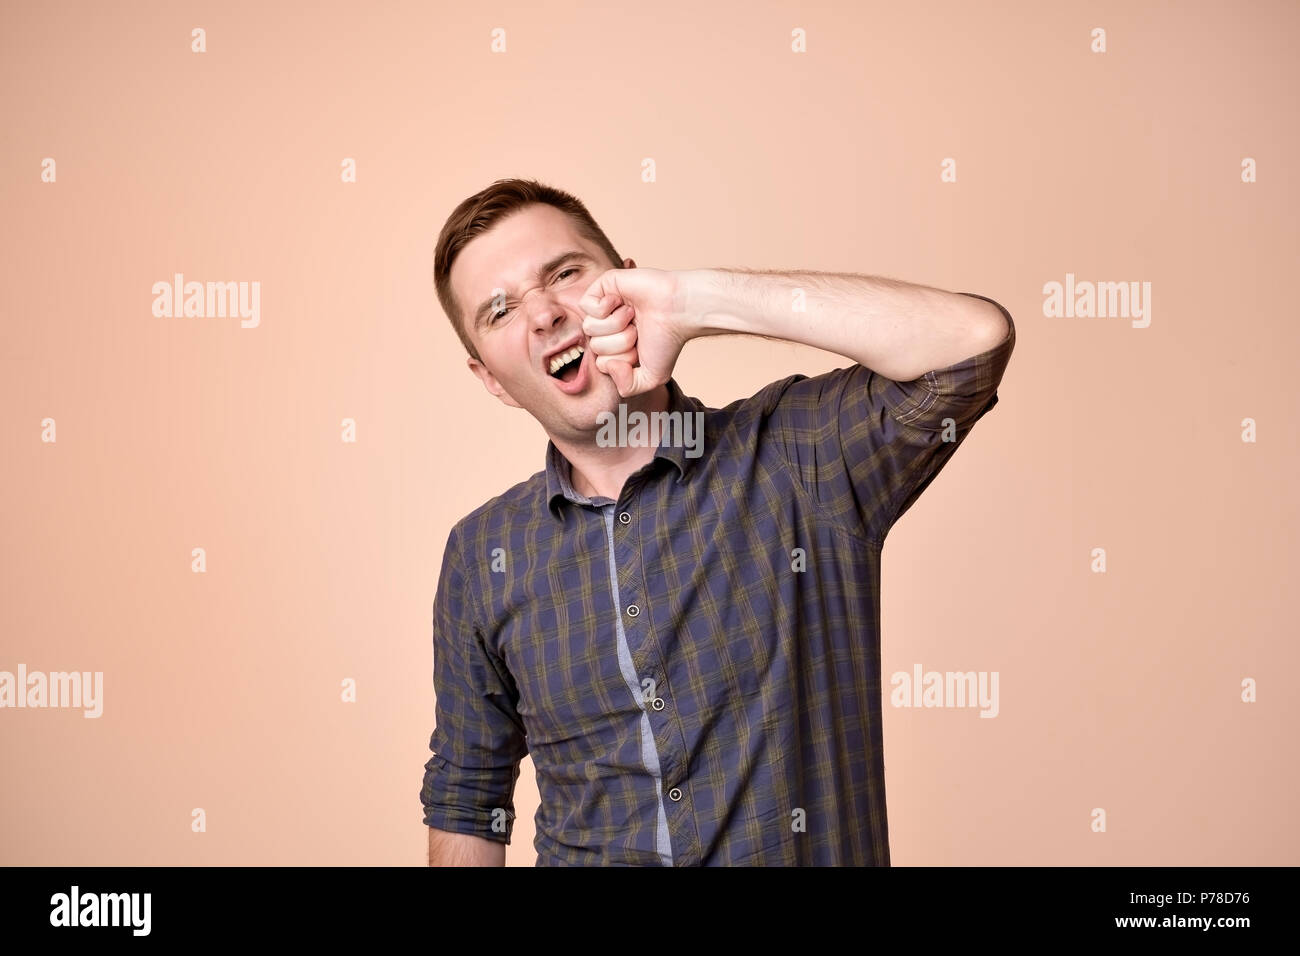 European man beating himself with fist in face. Stock Photo